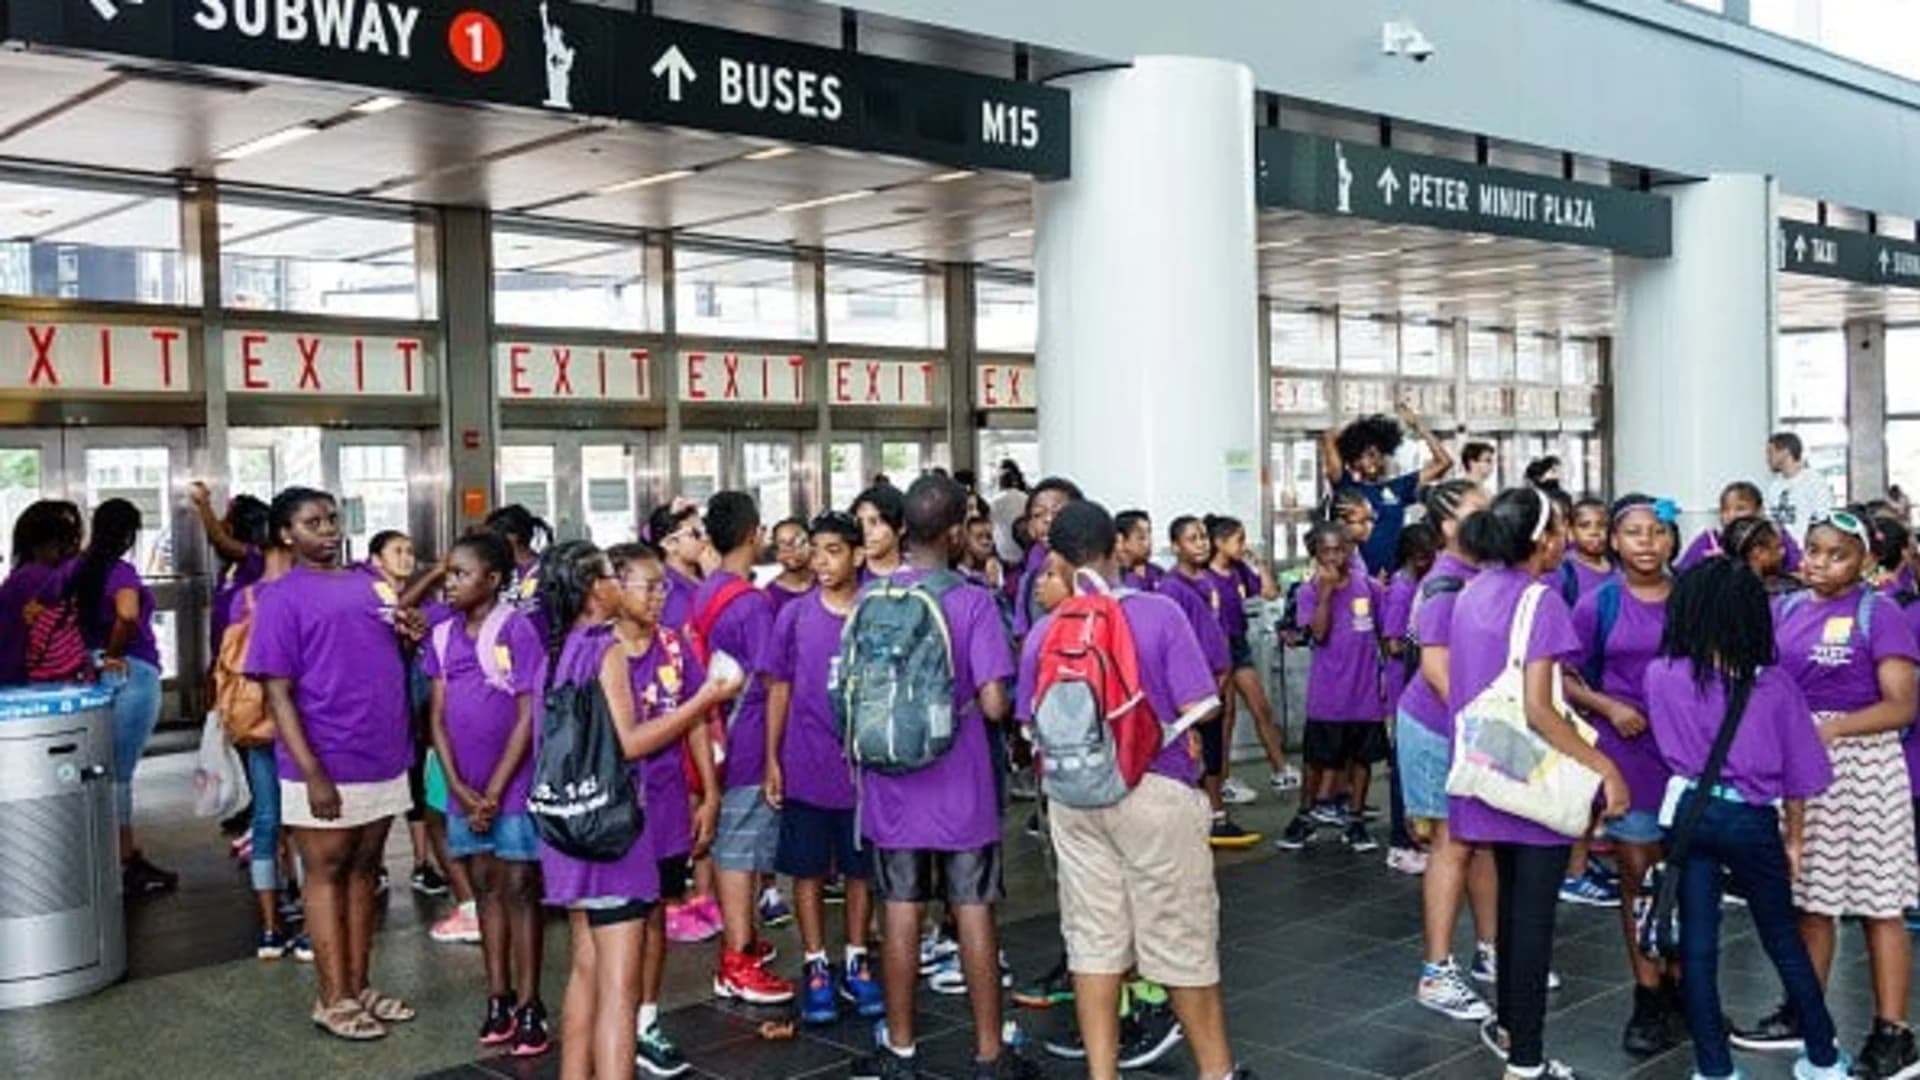 #N12BK: Students protest summer camp cuts